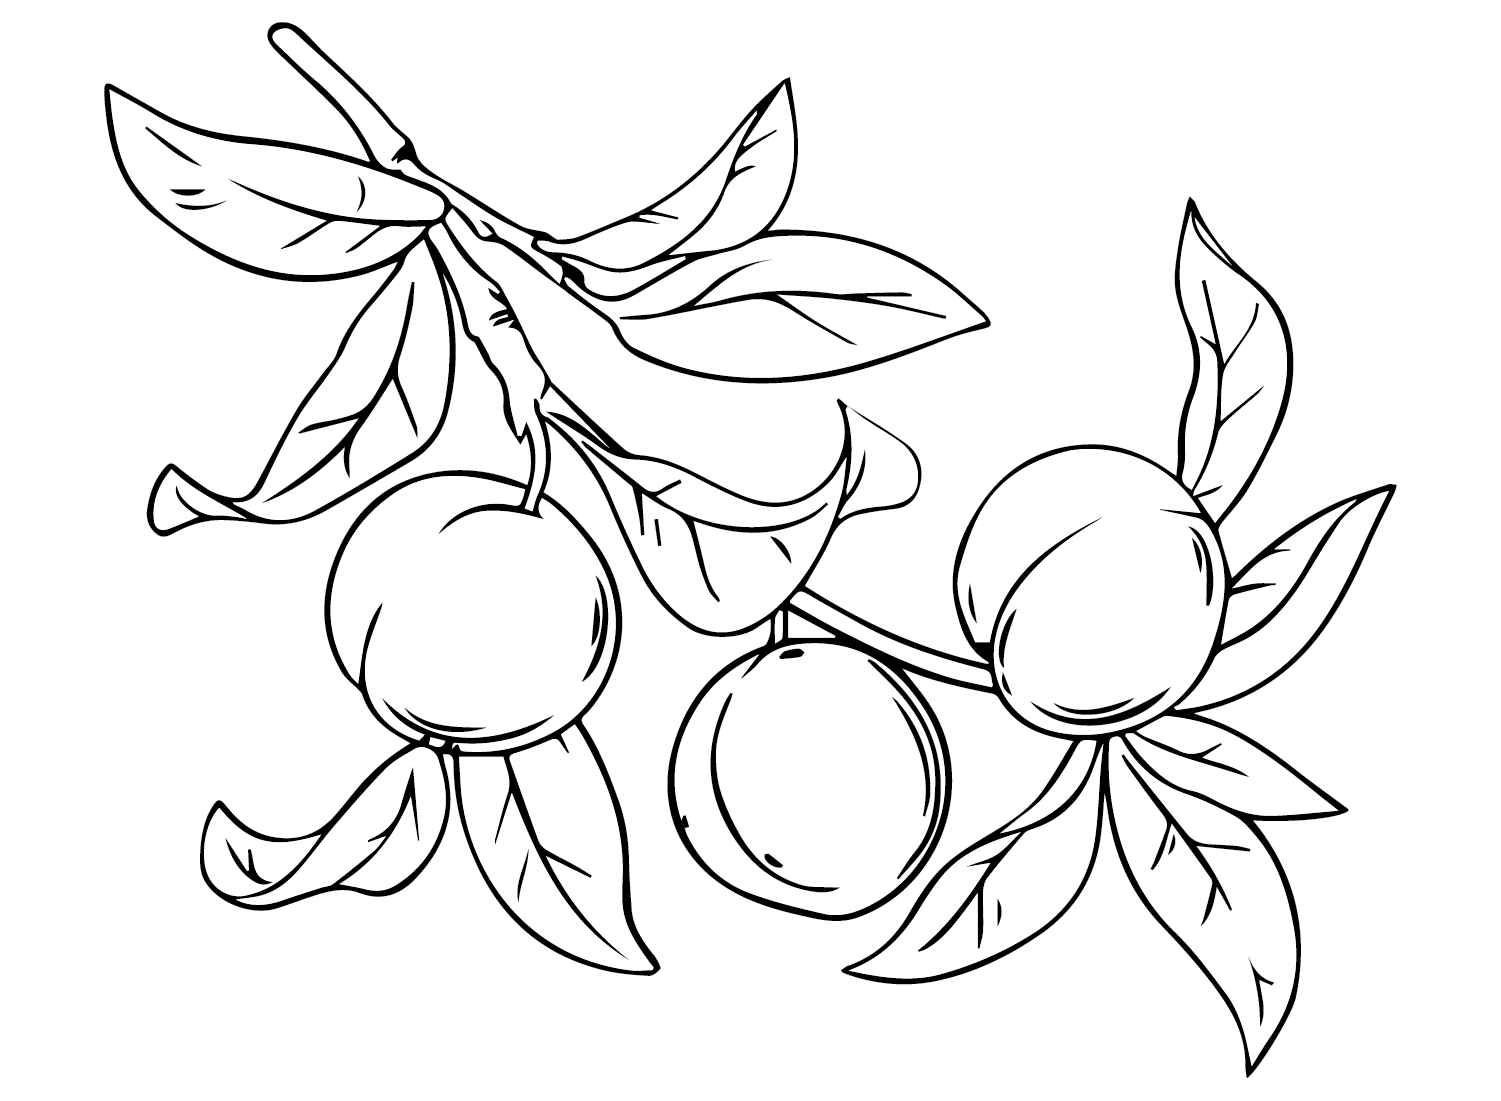 Nectarine Branch Coloring Page